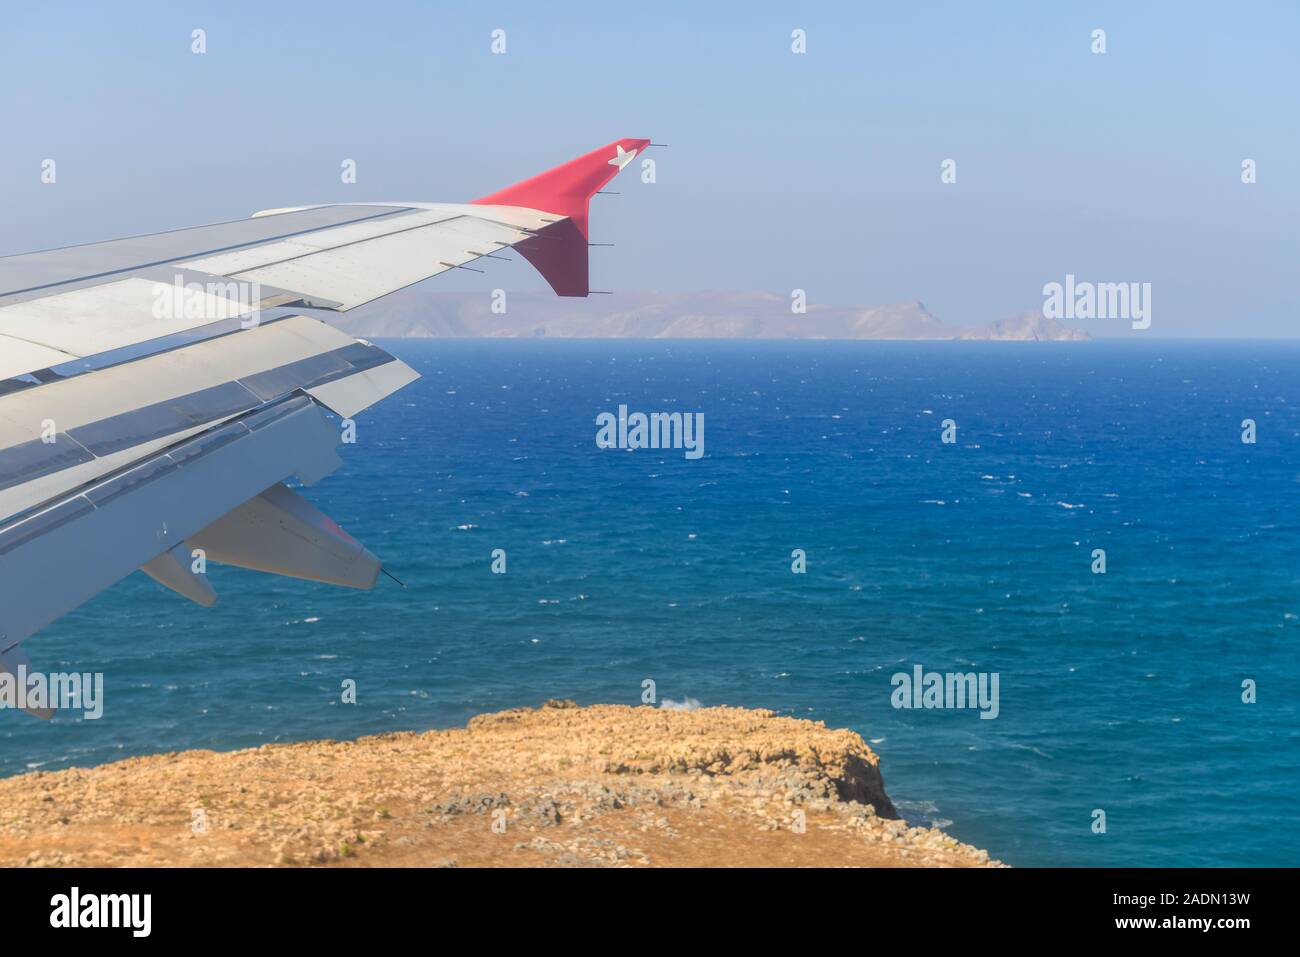 The plane landed at the airport. Stock Photo